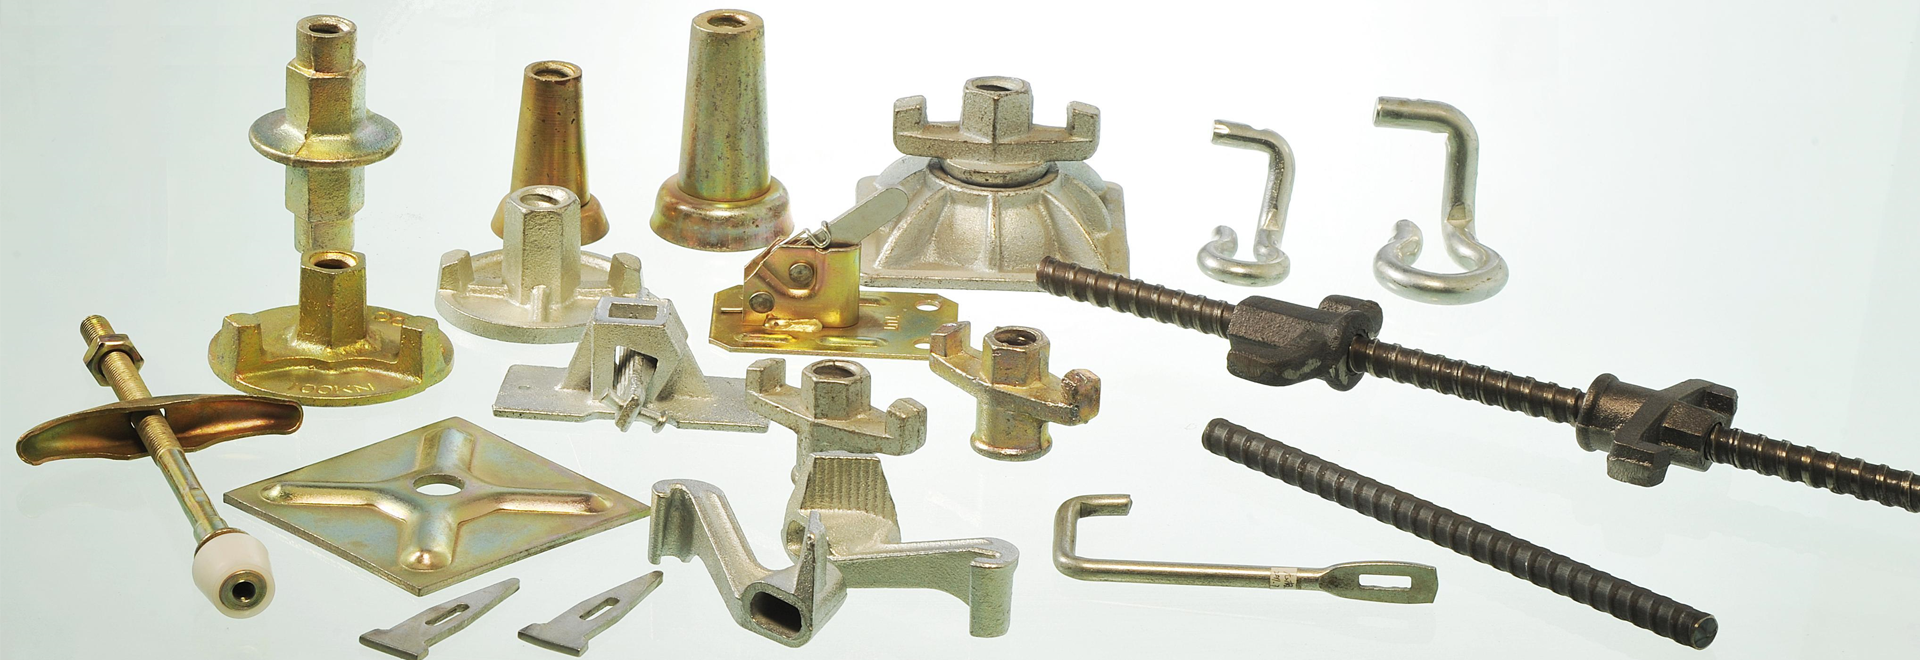 Scaffolding Clamps Supplier